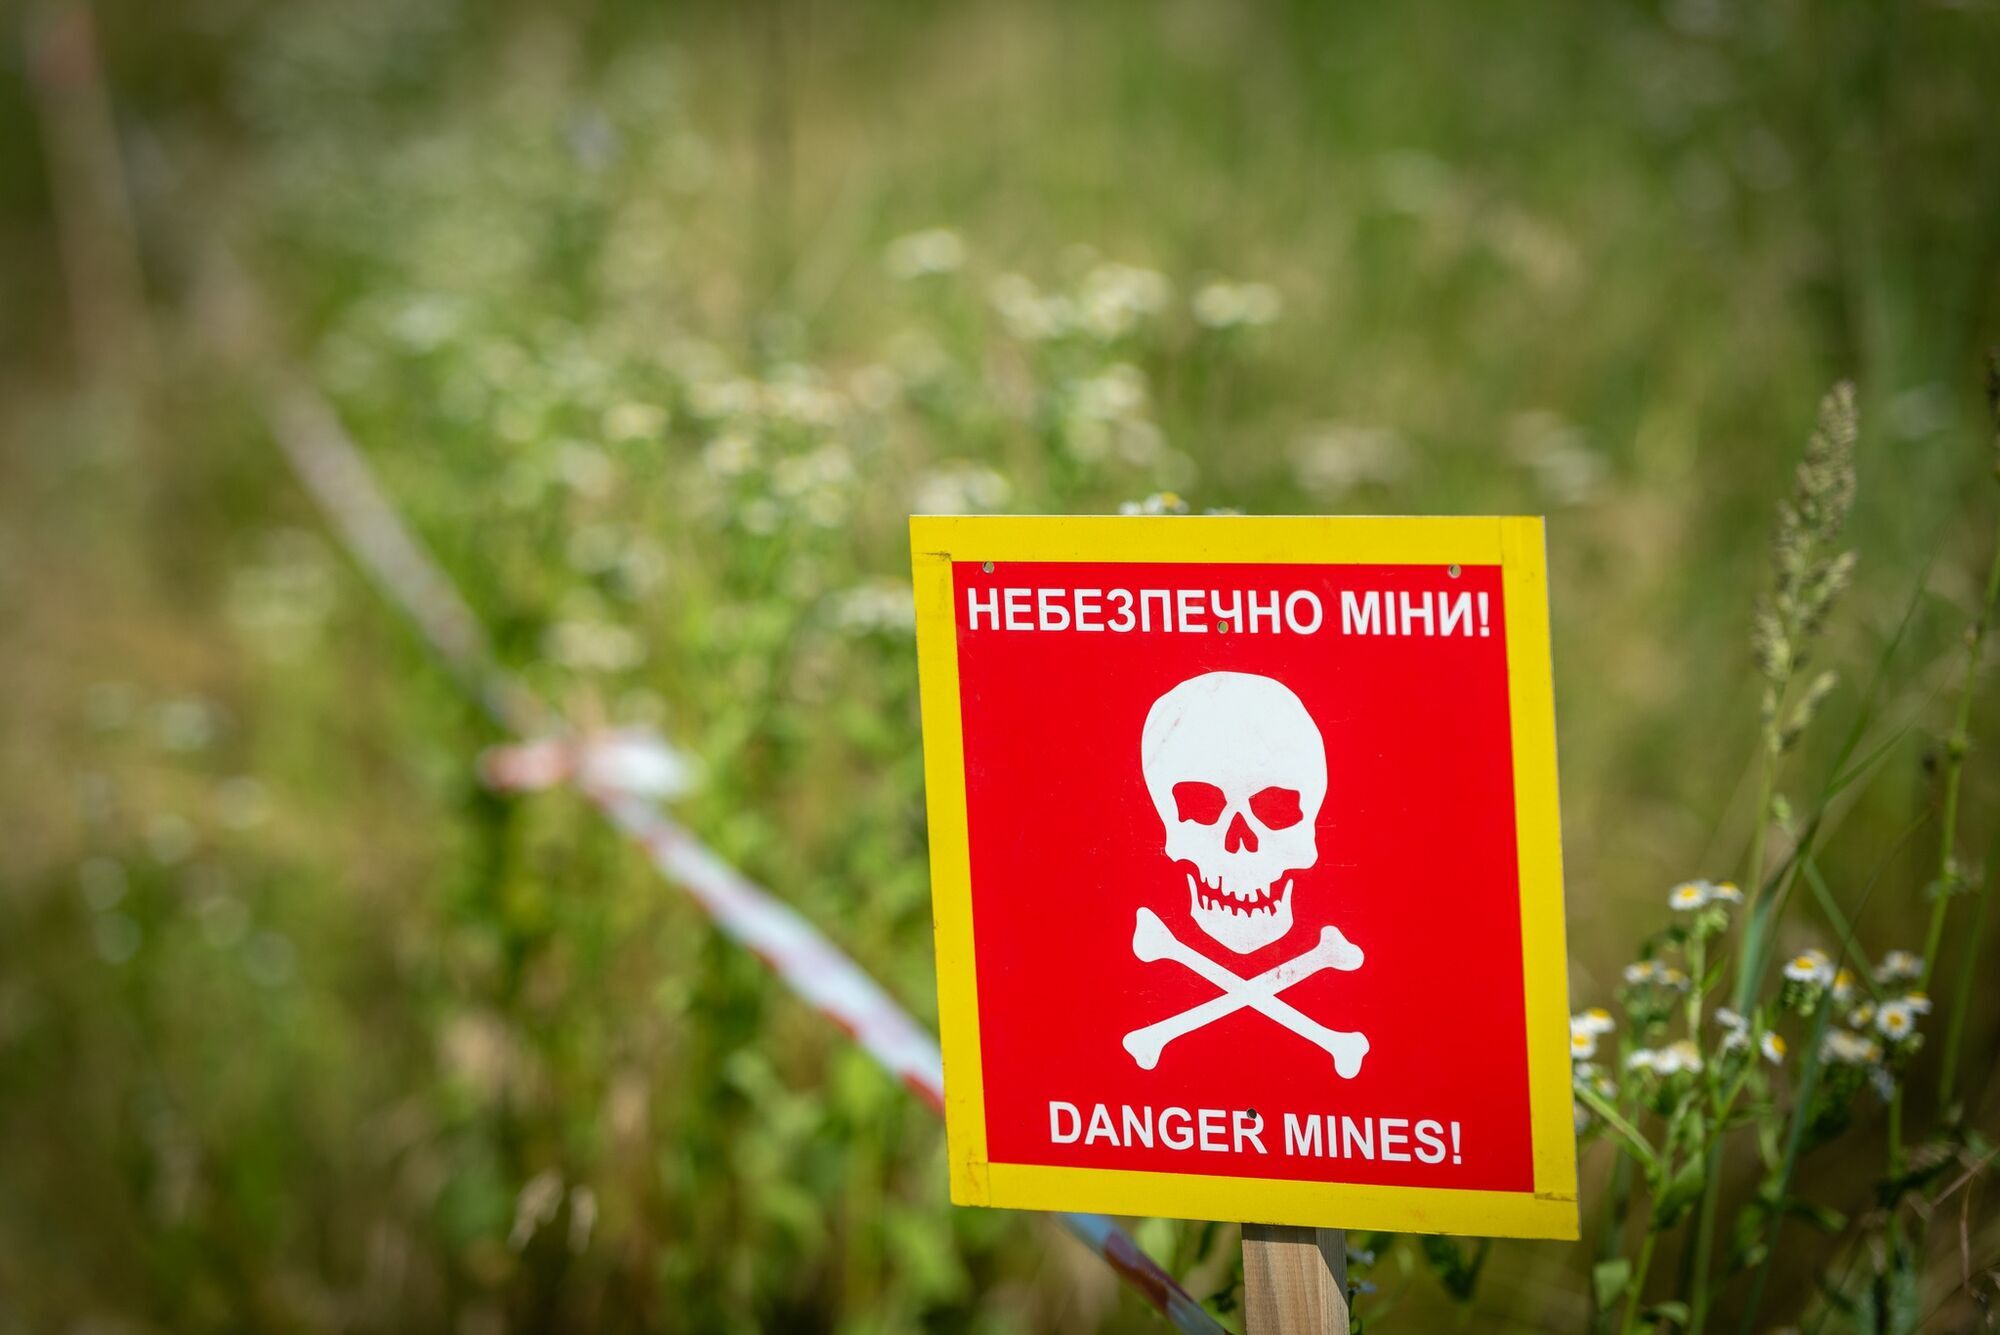 Ukraine to receive over $240 million and demining equipment: details